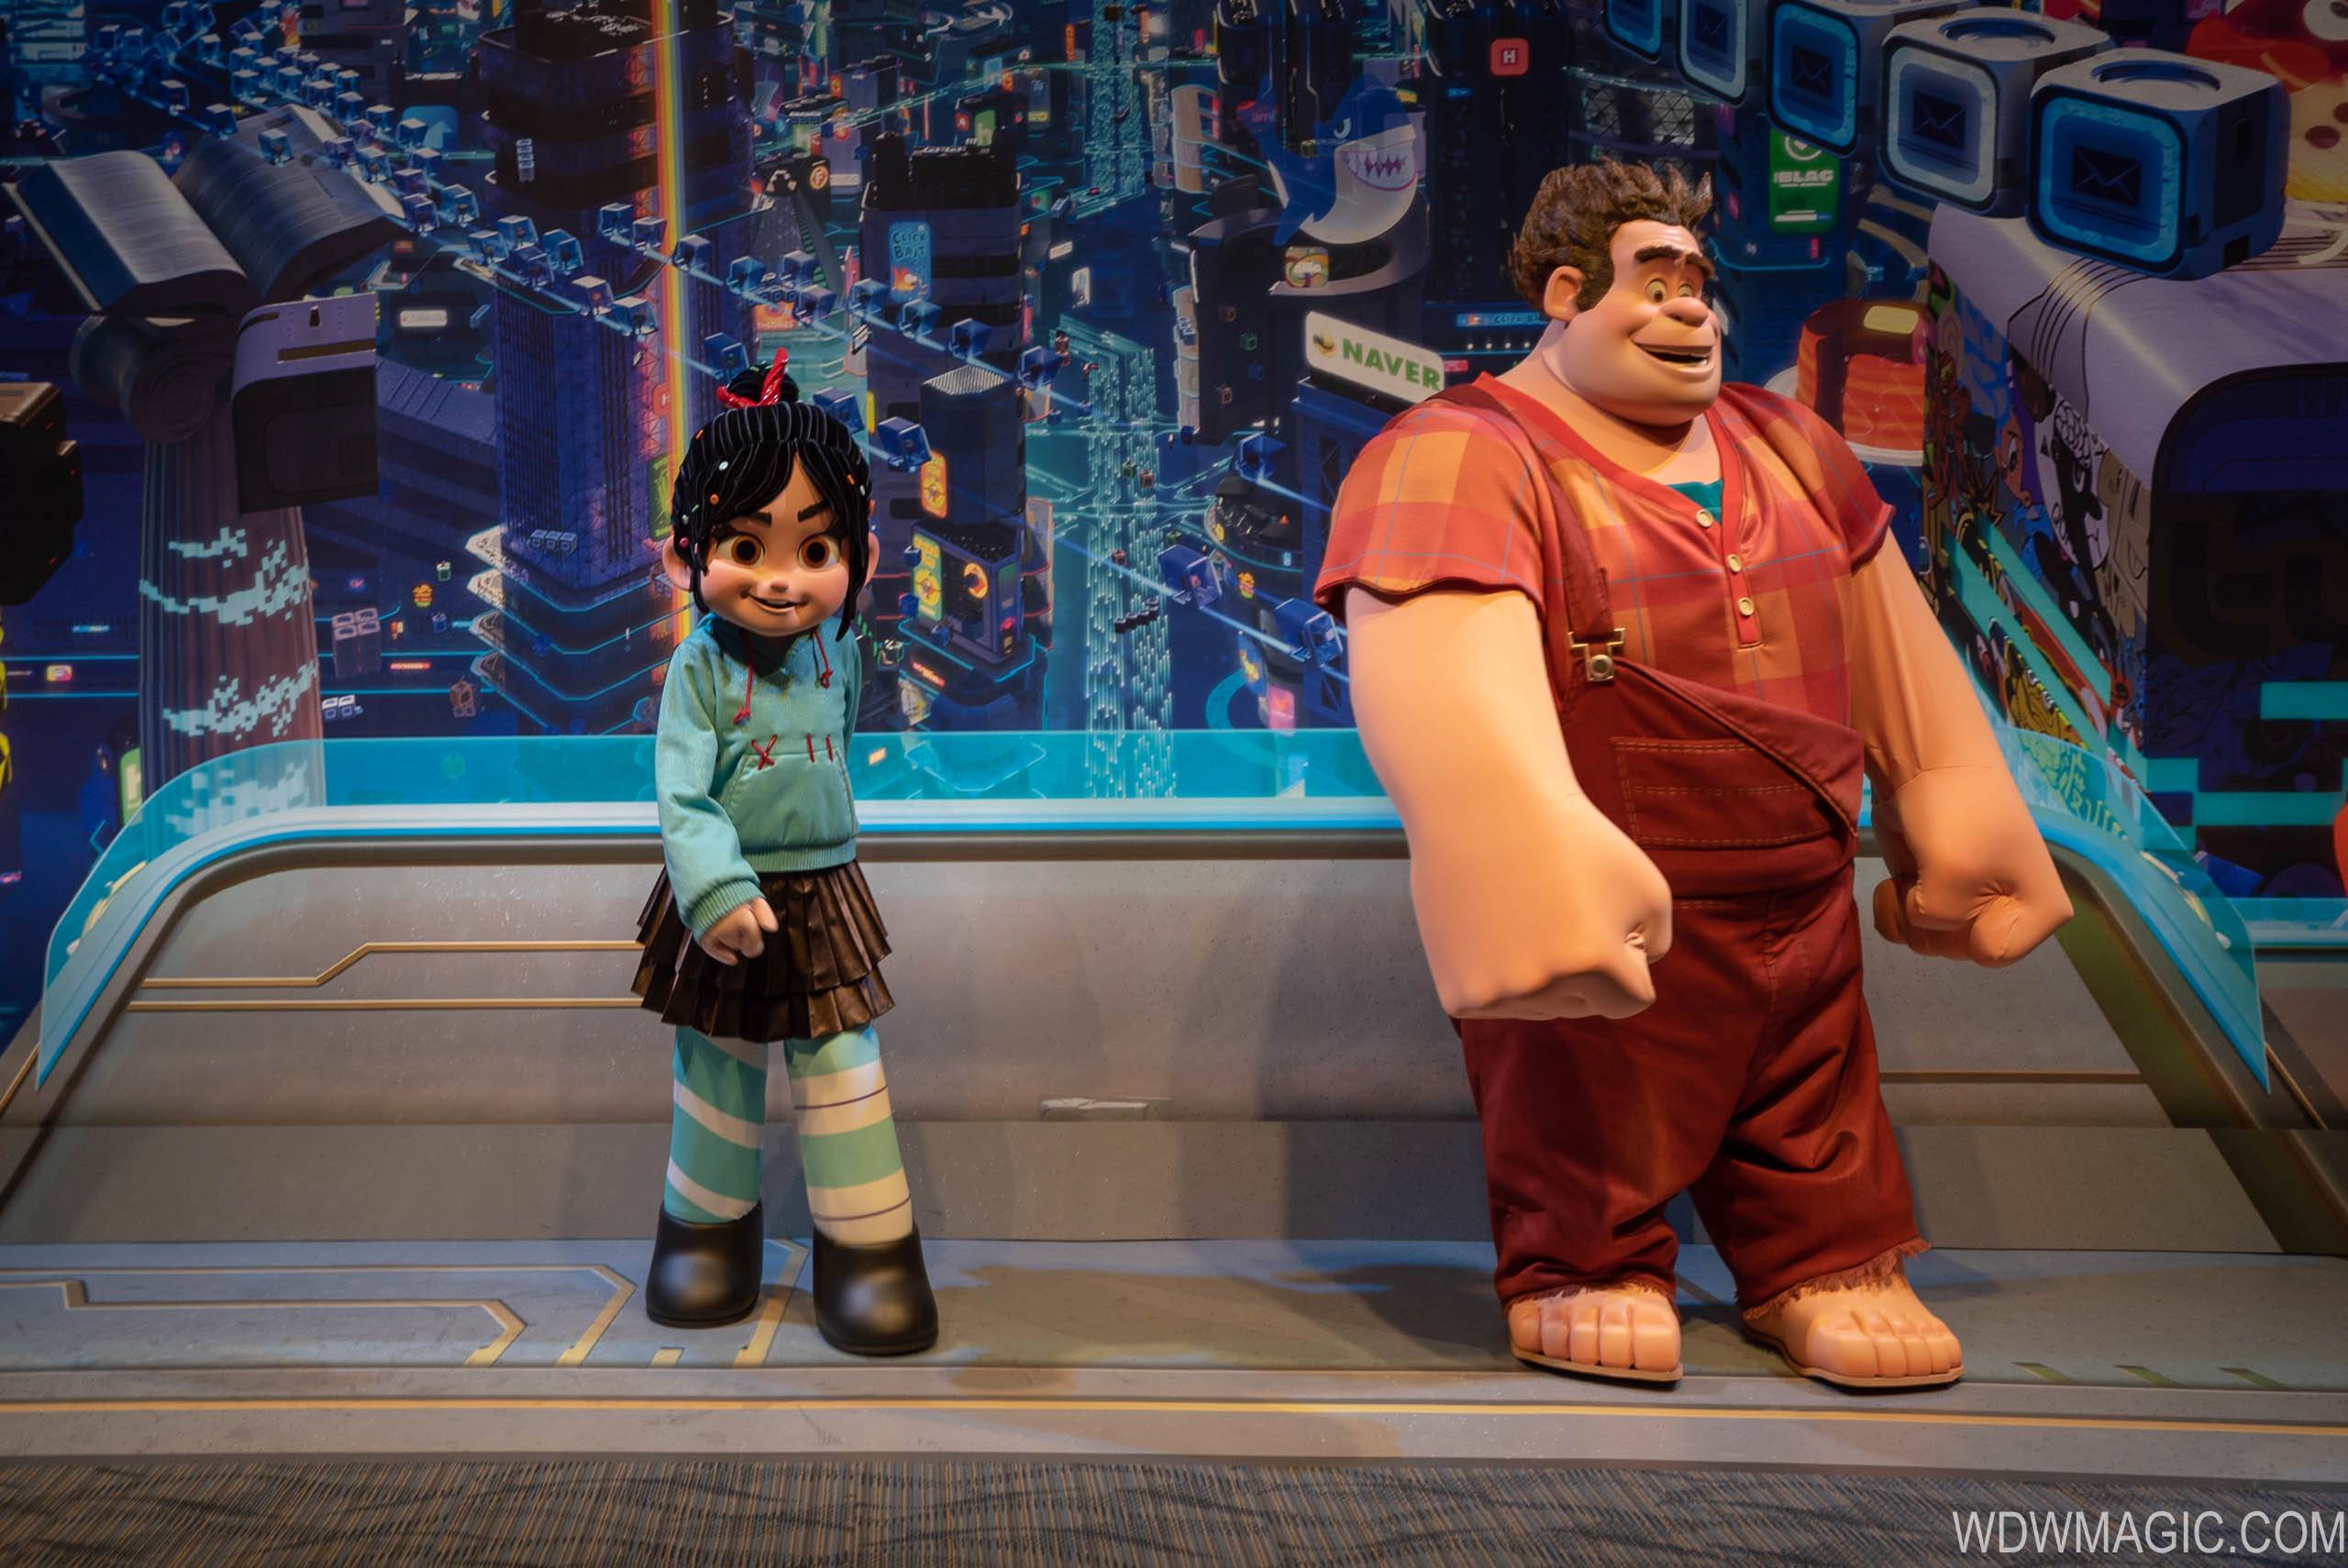 Ralph and Vanellope in the Innoventions location